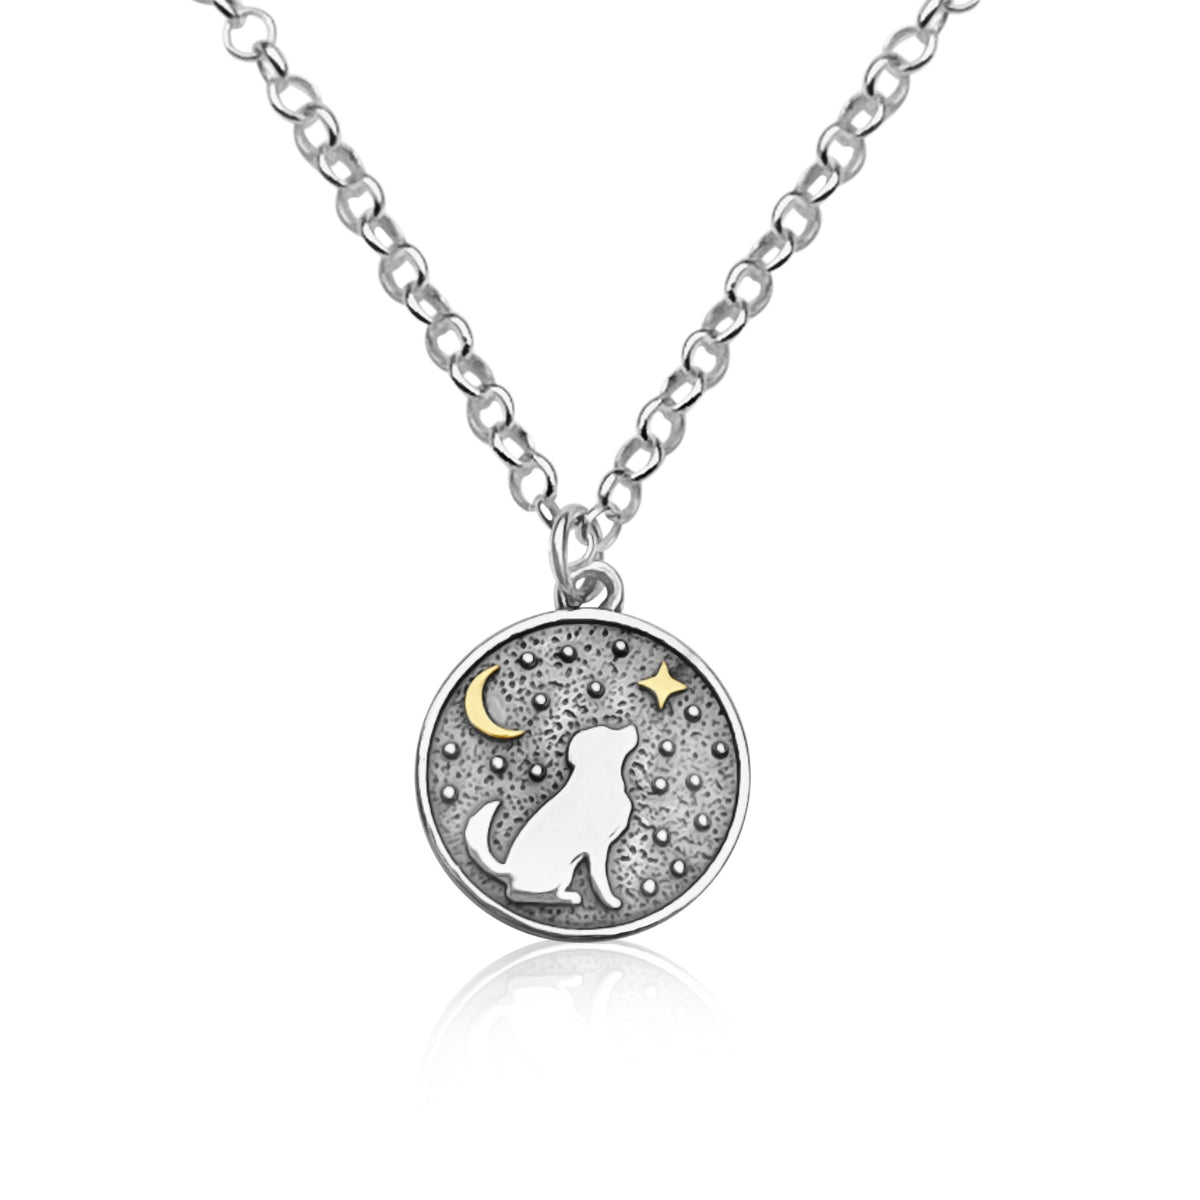 The "Forever Faithful Dog Necklace," is a sterling silver masterpiece that encapsulates the enduring love and unwavering loyalty shared between humans and their canine companions.